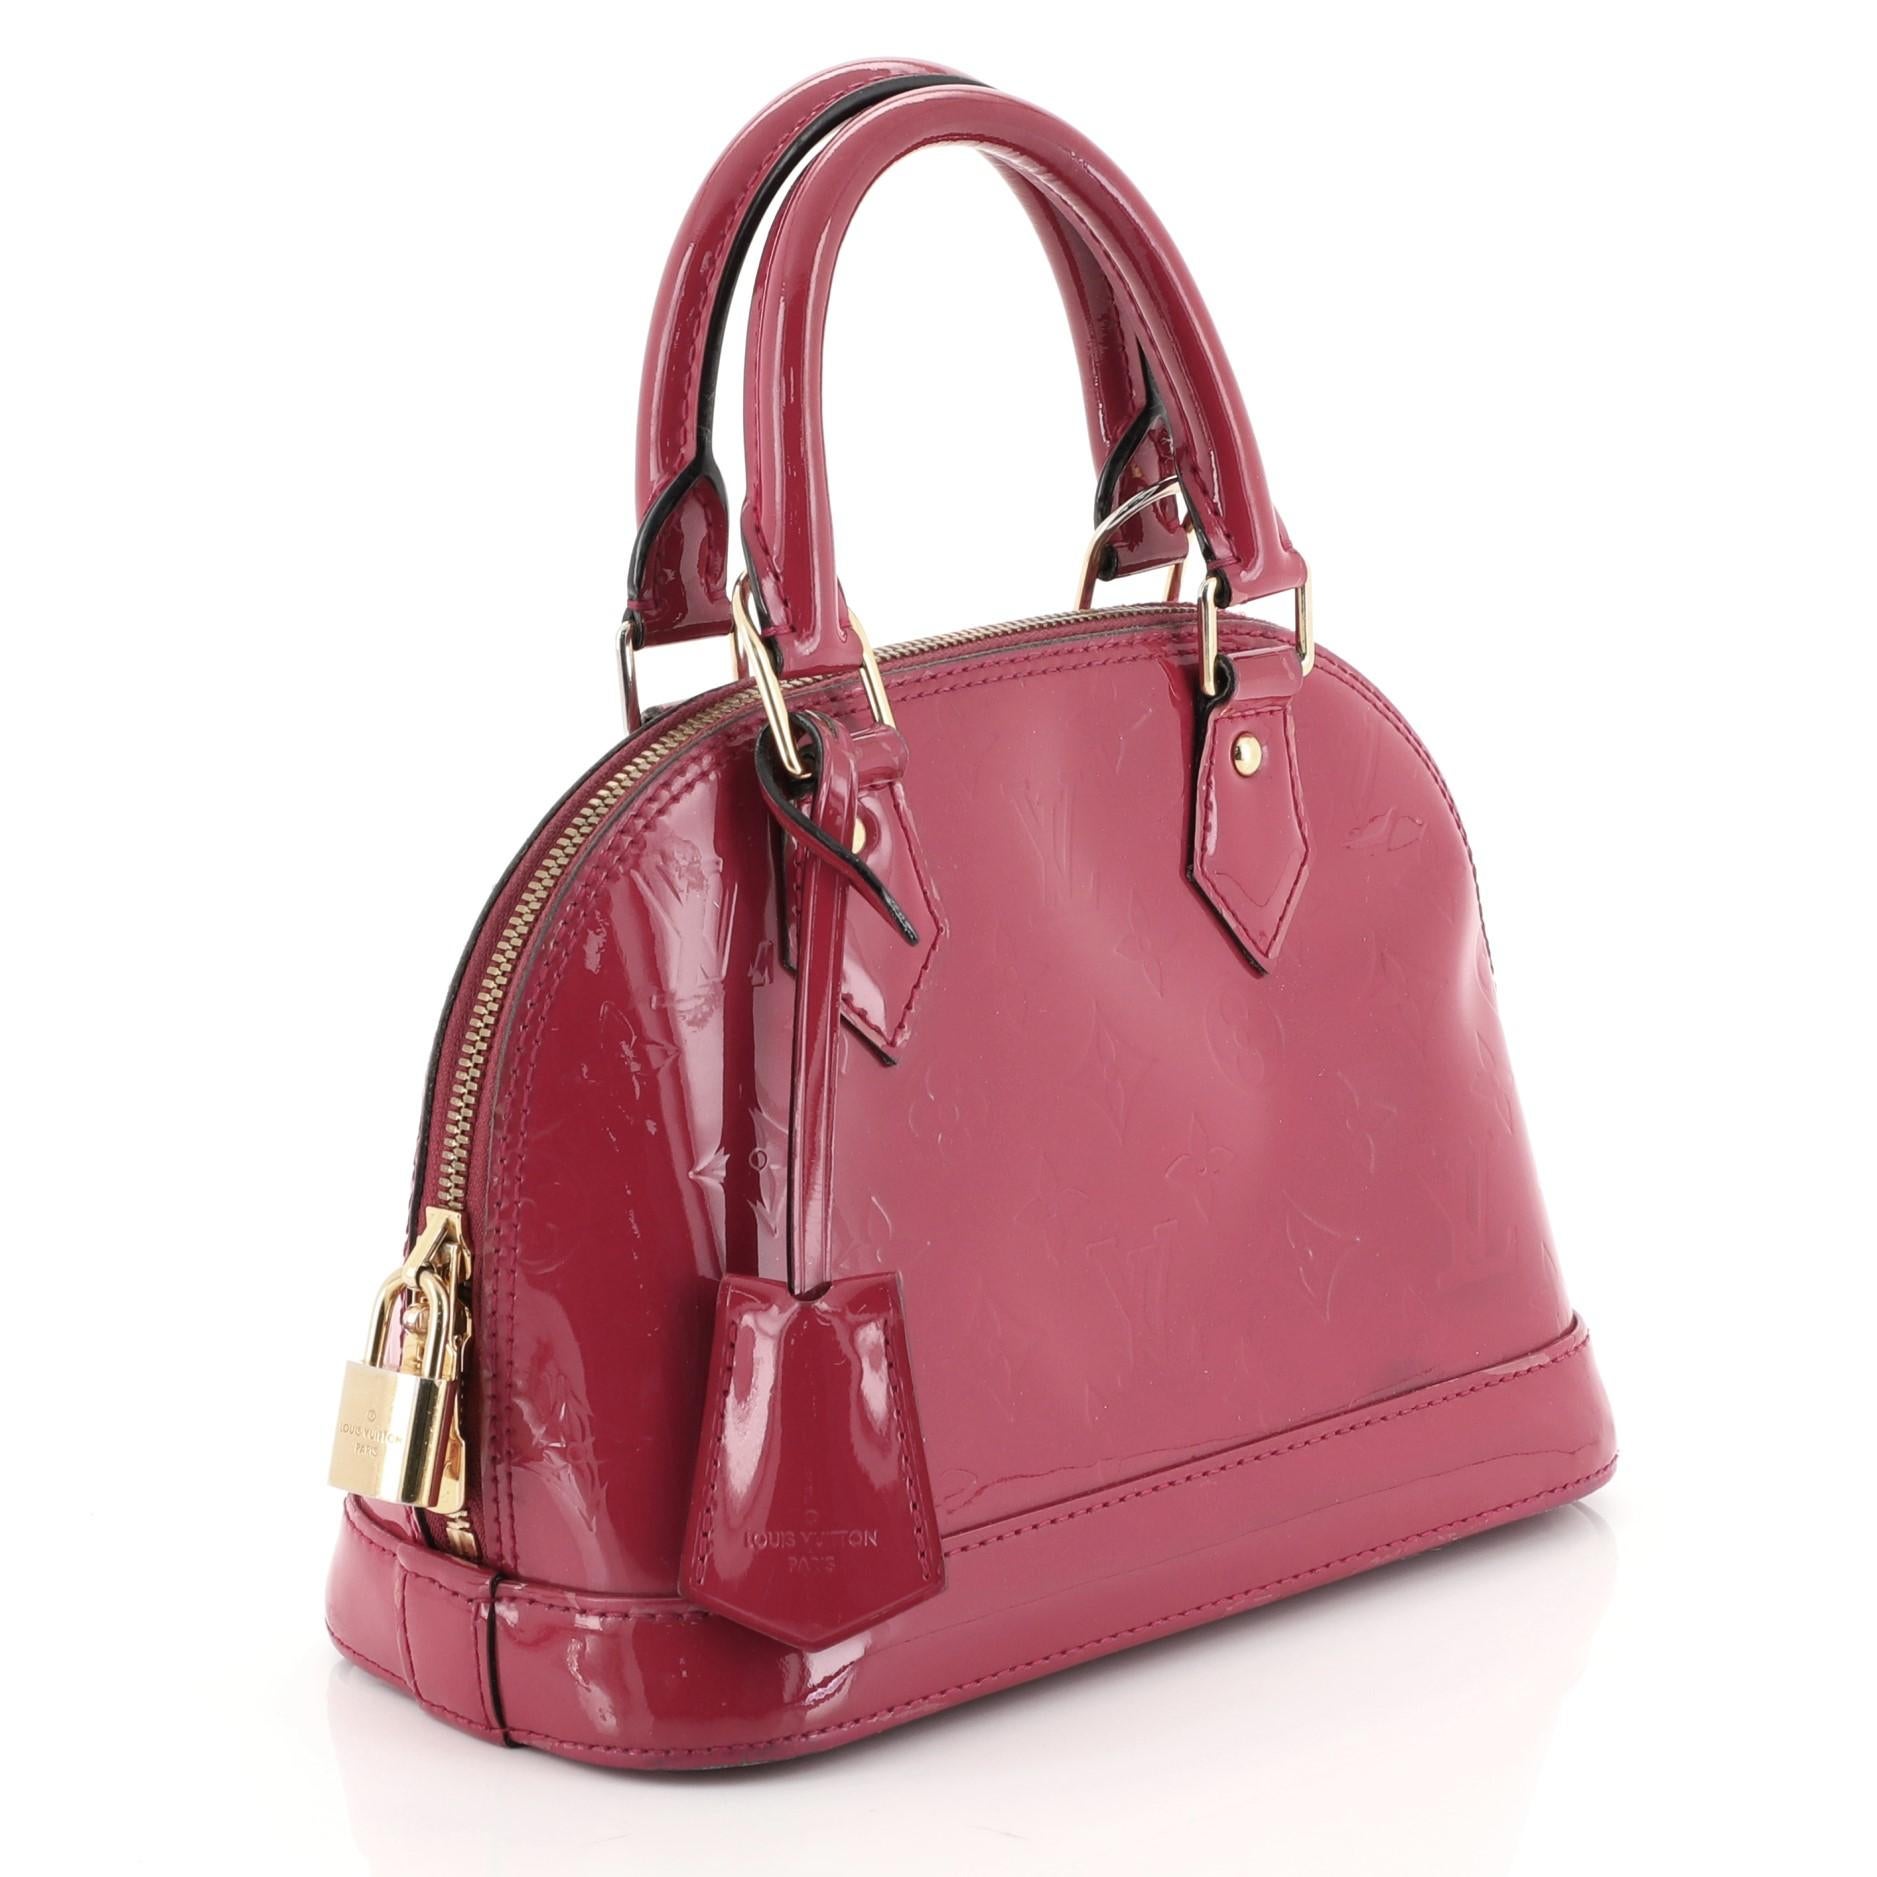 This Louis Vuitton Alma Handbag Monogram Vernis BB, crafted from pink monogram vernis leather, features dual rolled handles, protective base studs, and gold-tone hardware. Its two-way zip closure opens to a pink fabric interior with slip pocket.